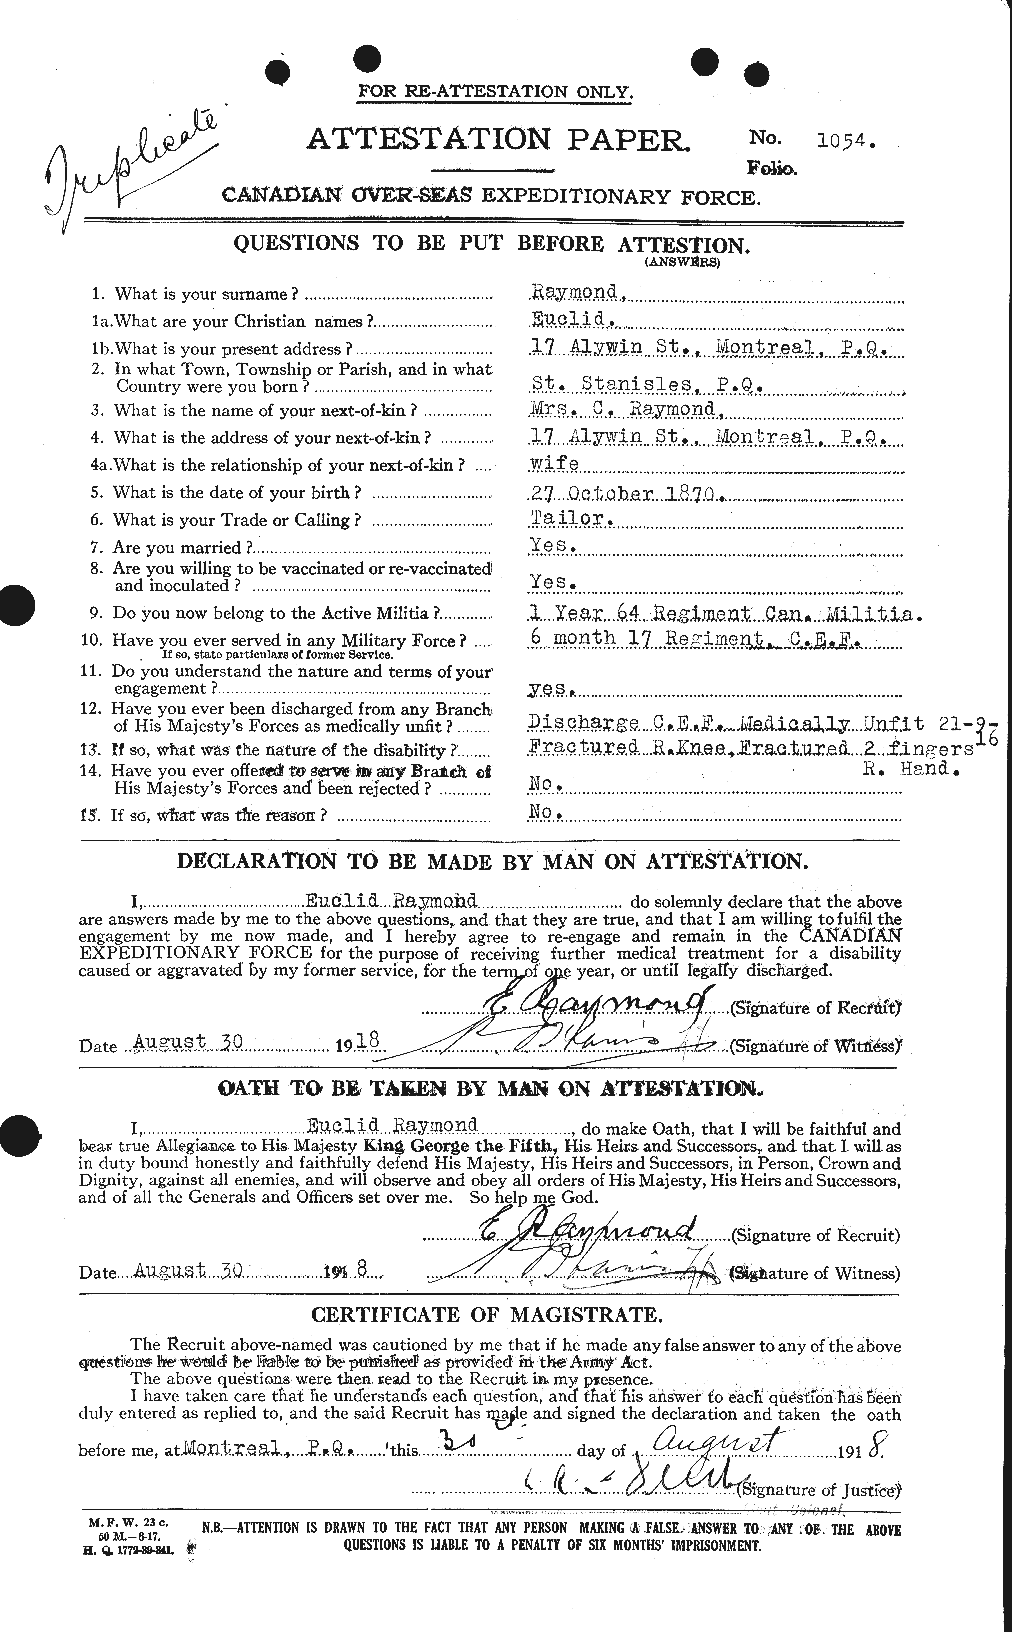 Personnel Records of the First World War - CEF 595320a